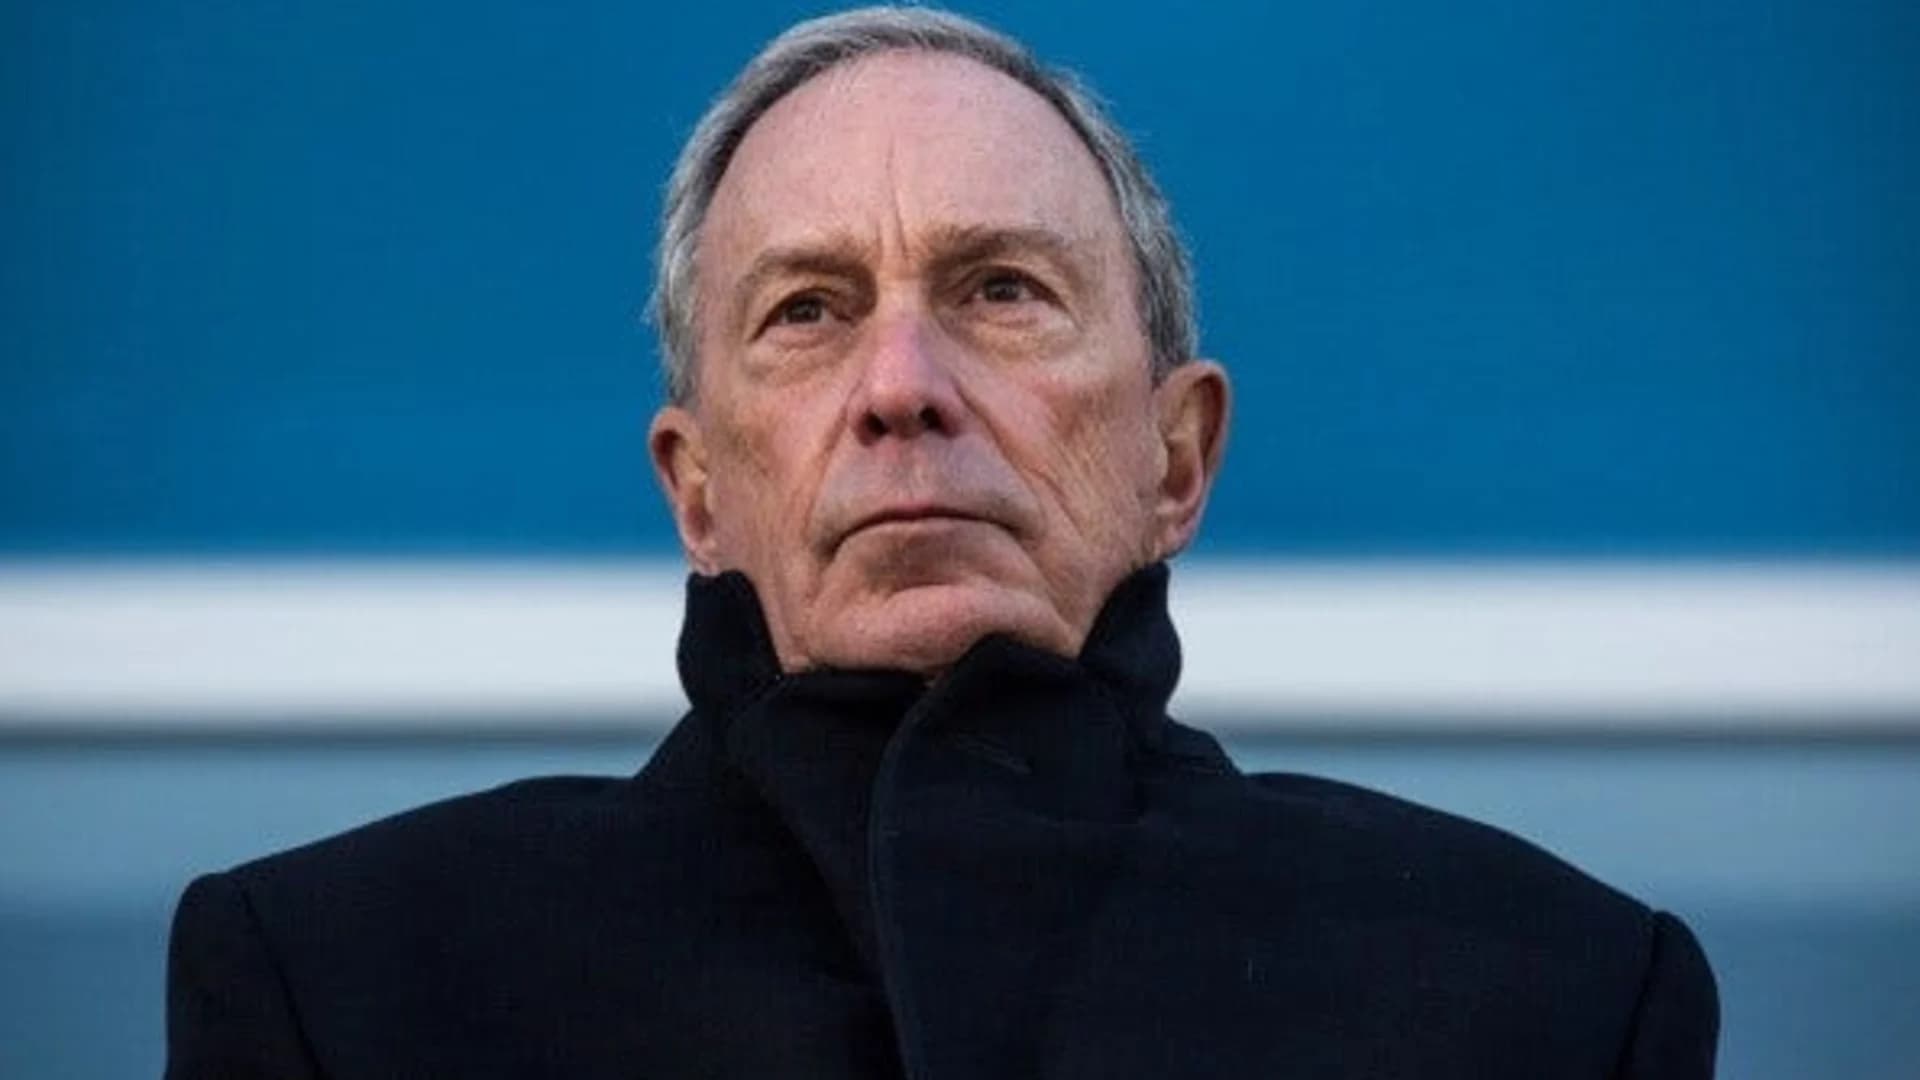 Ex-NYC Mayor Bloomberg won't run for president in 2020